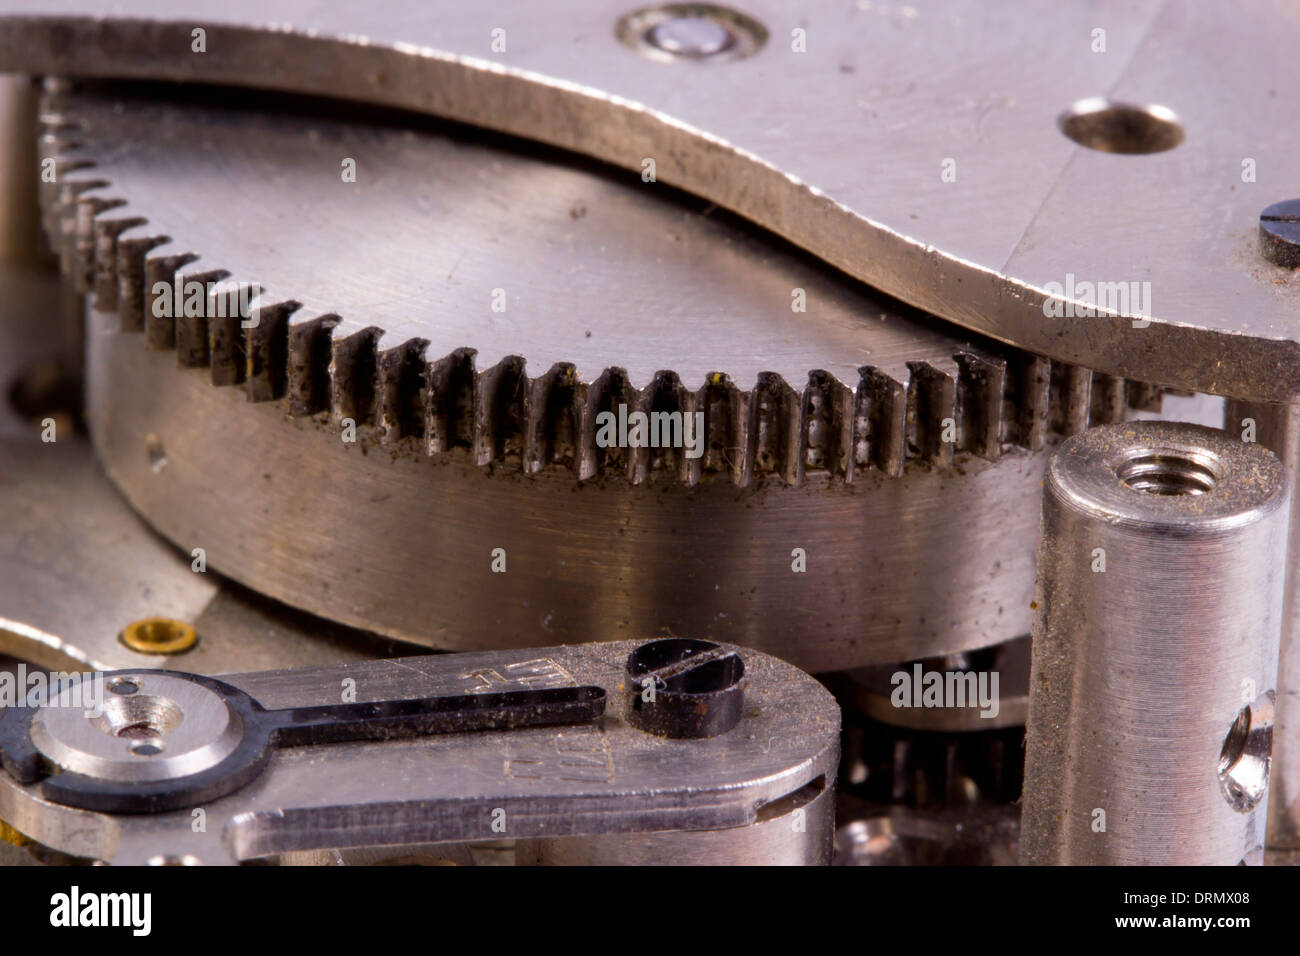 Details of a wrist watch close up Stock Photo